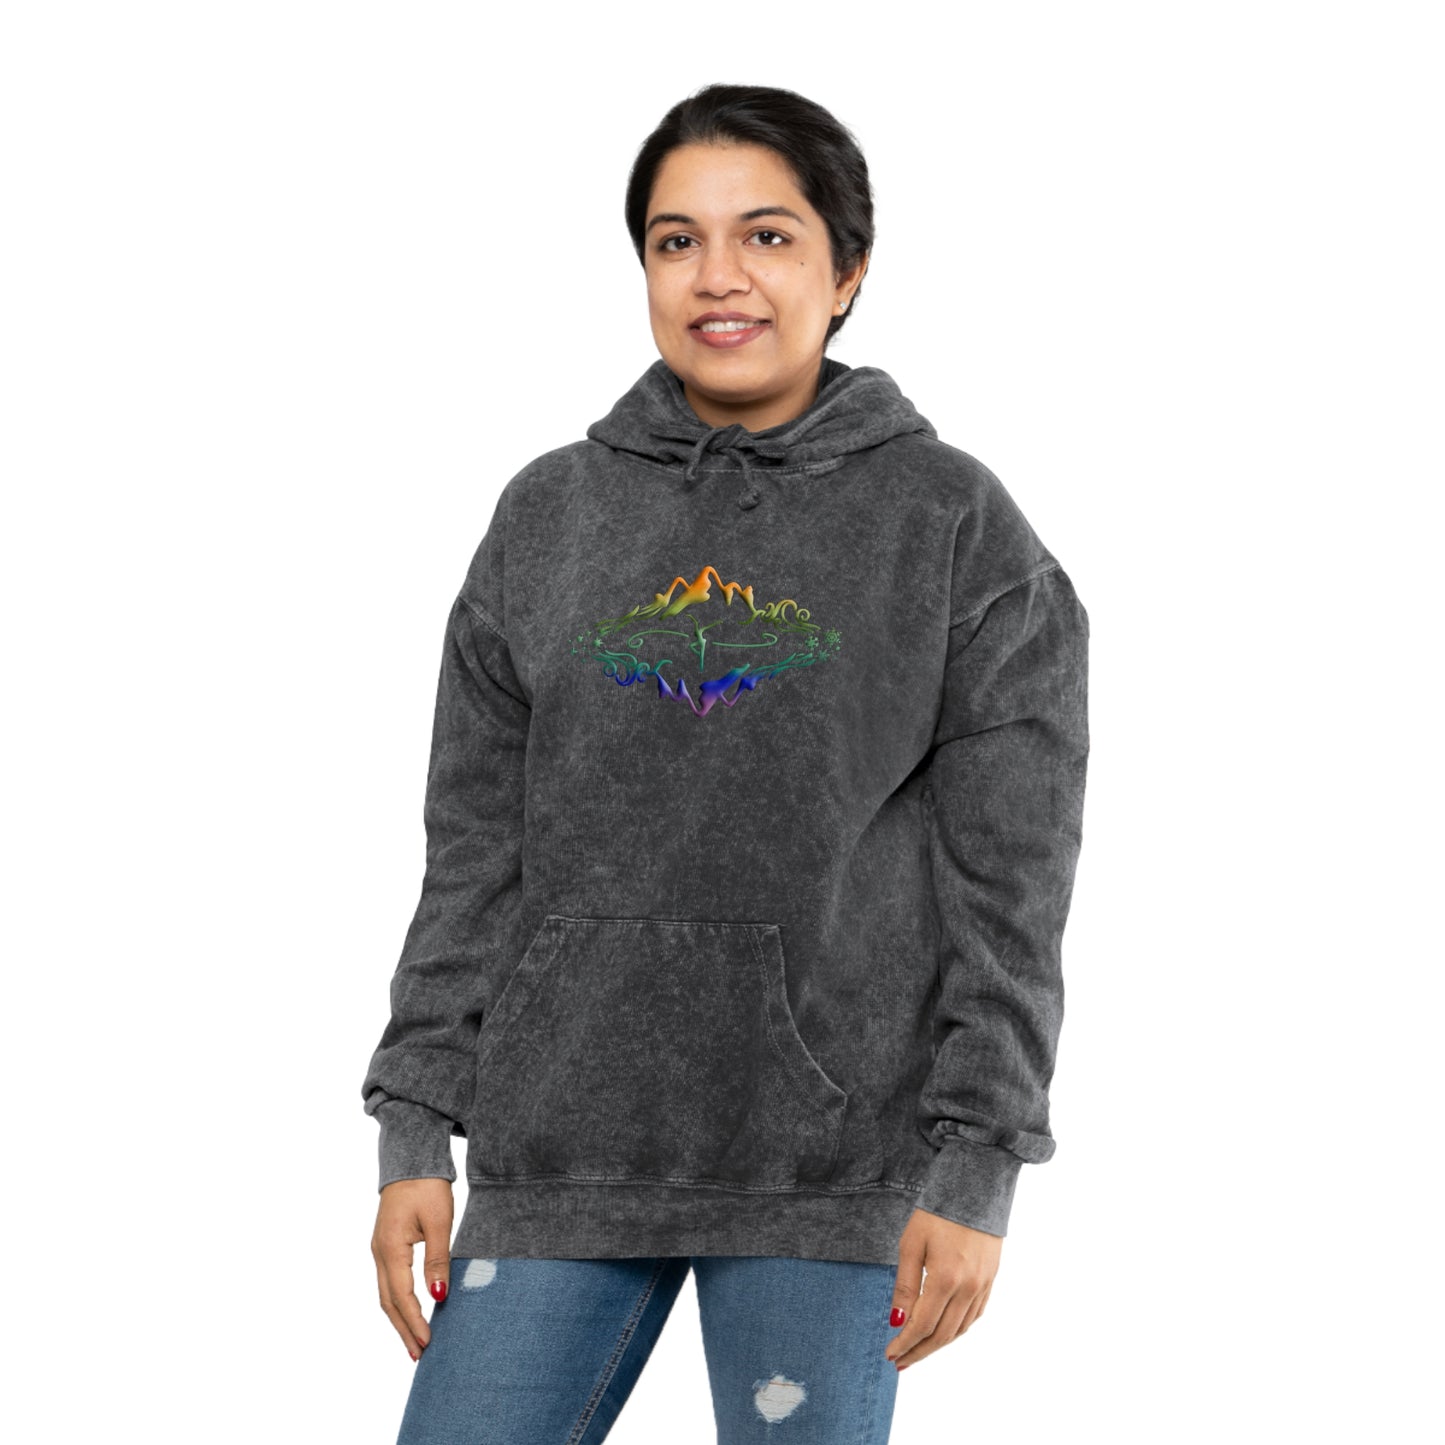 Copy of Unisex Mineral Wash Hoodie -- MOWRS design by TMK -- rainbow Ombre logo